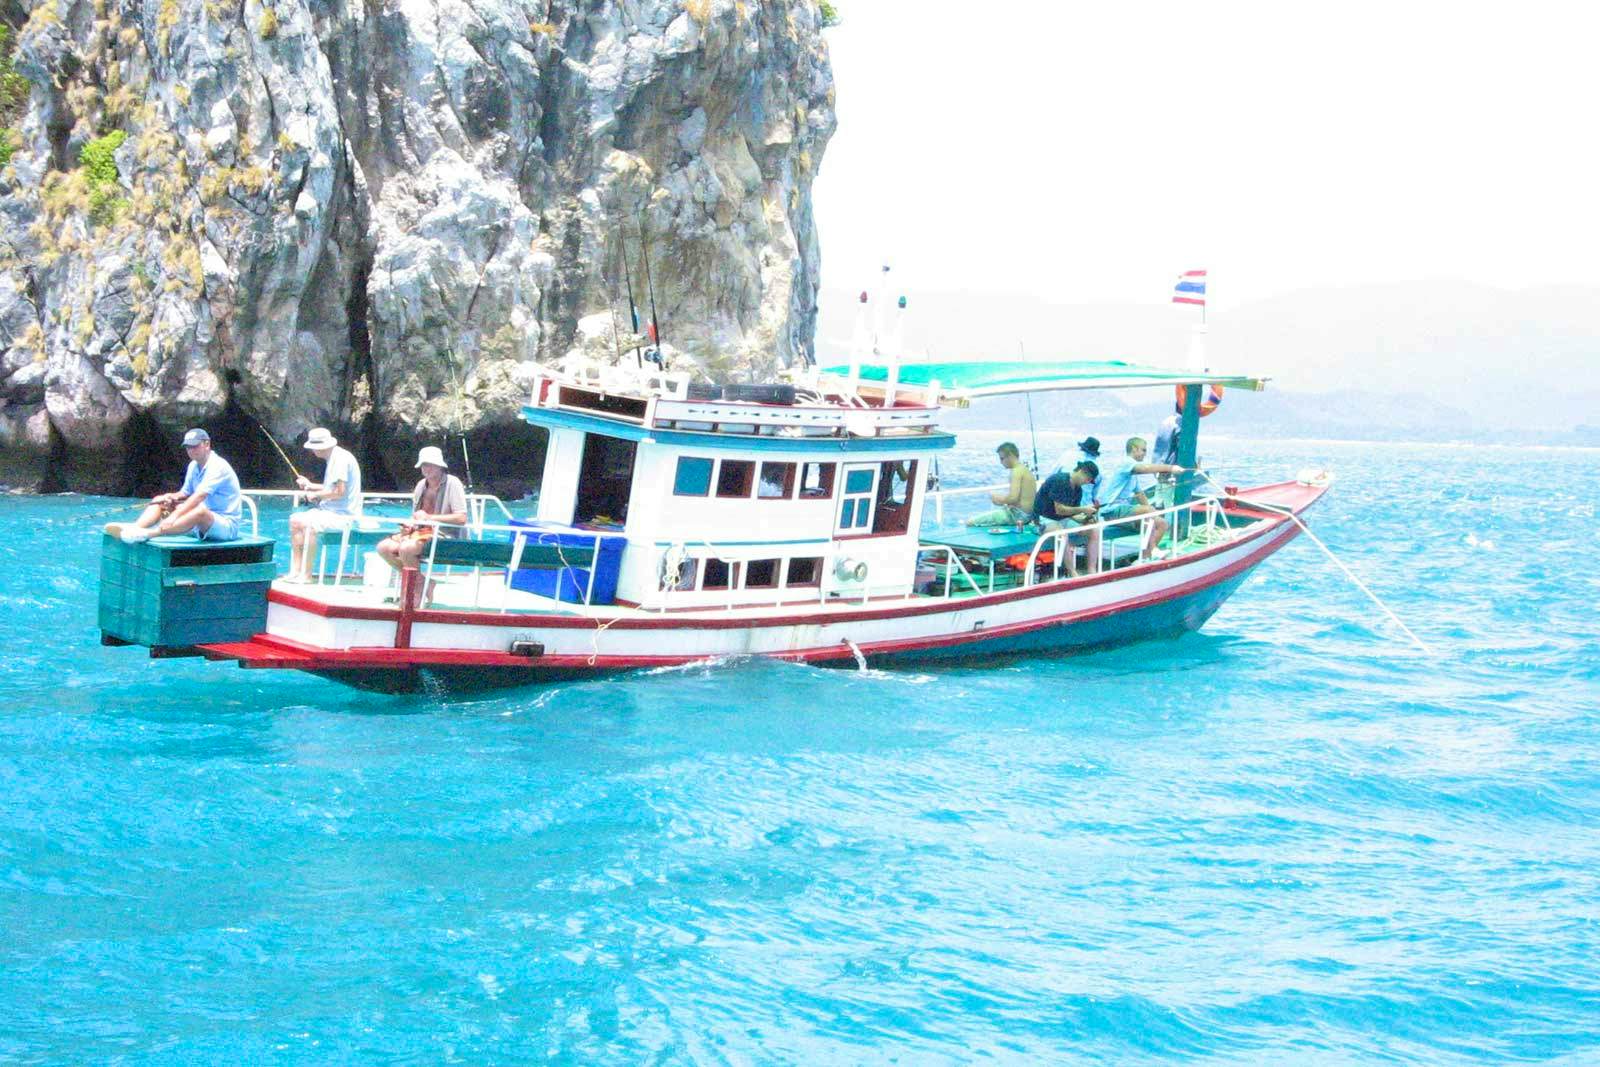 Fishing Tour for full day at the best bays and island waters for the perfect catch and Thailand delicacies tasting